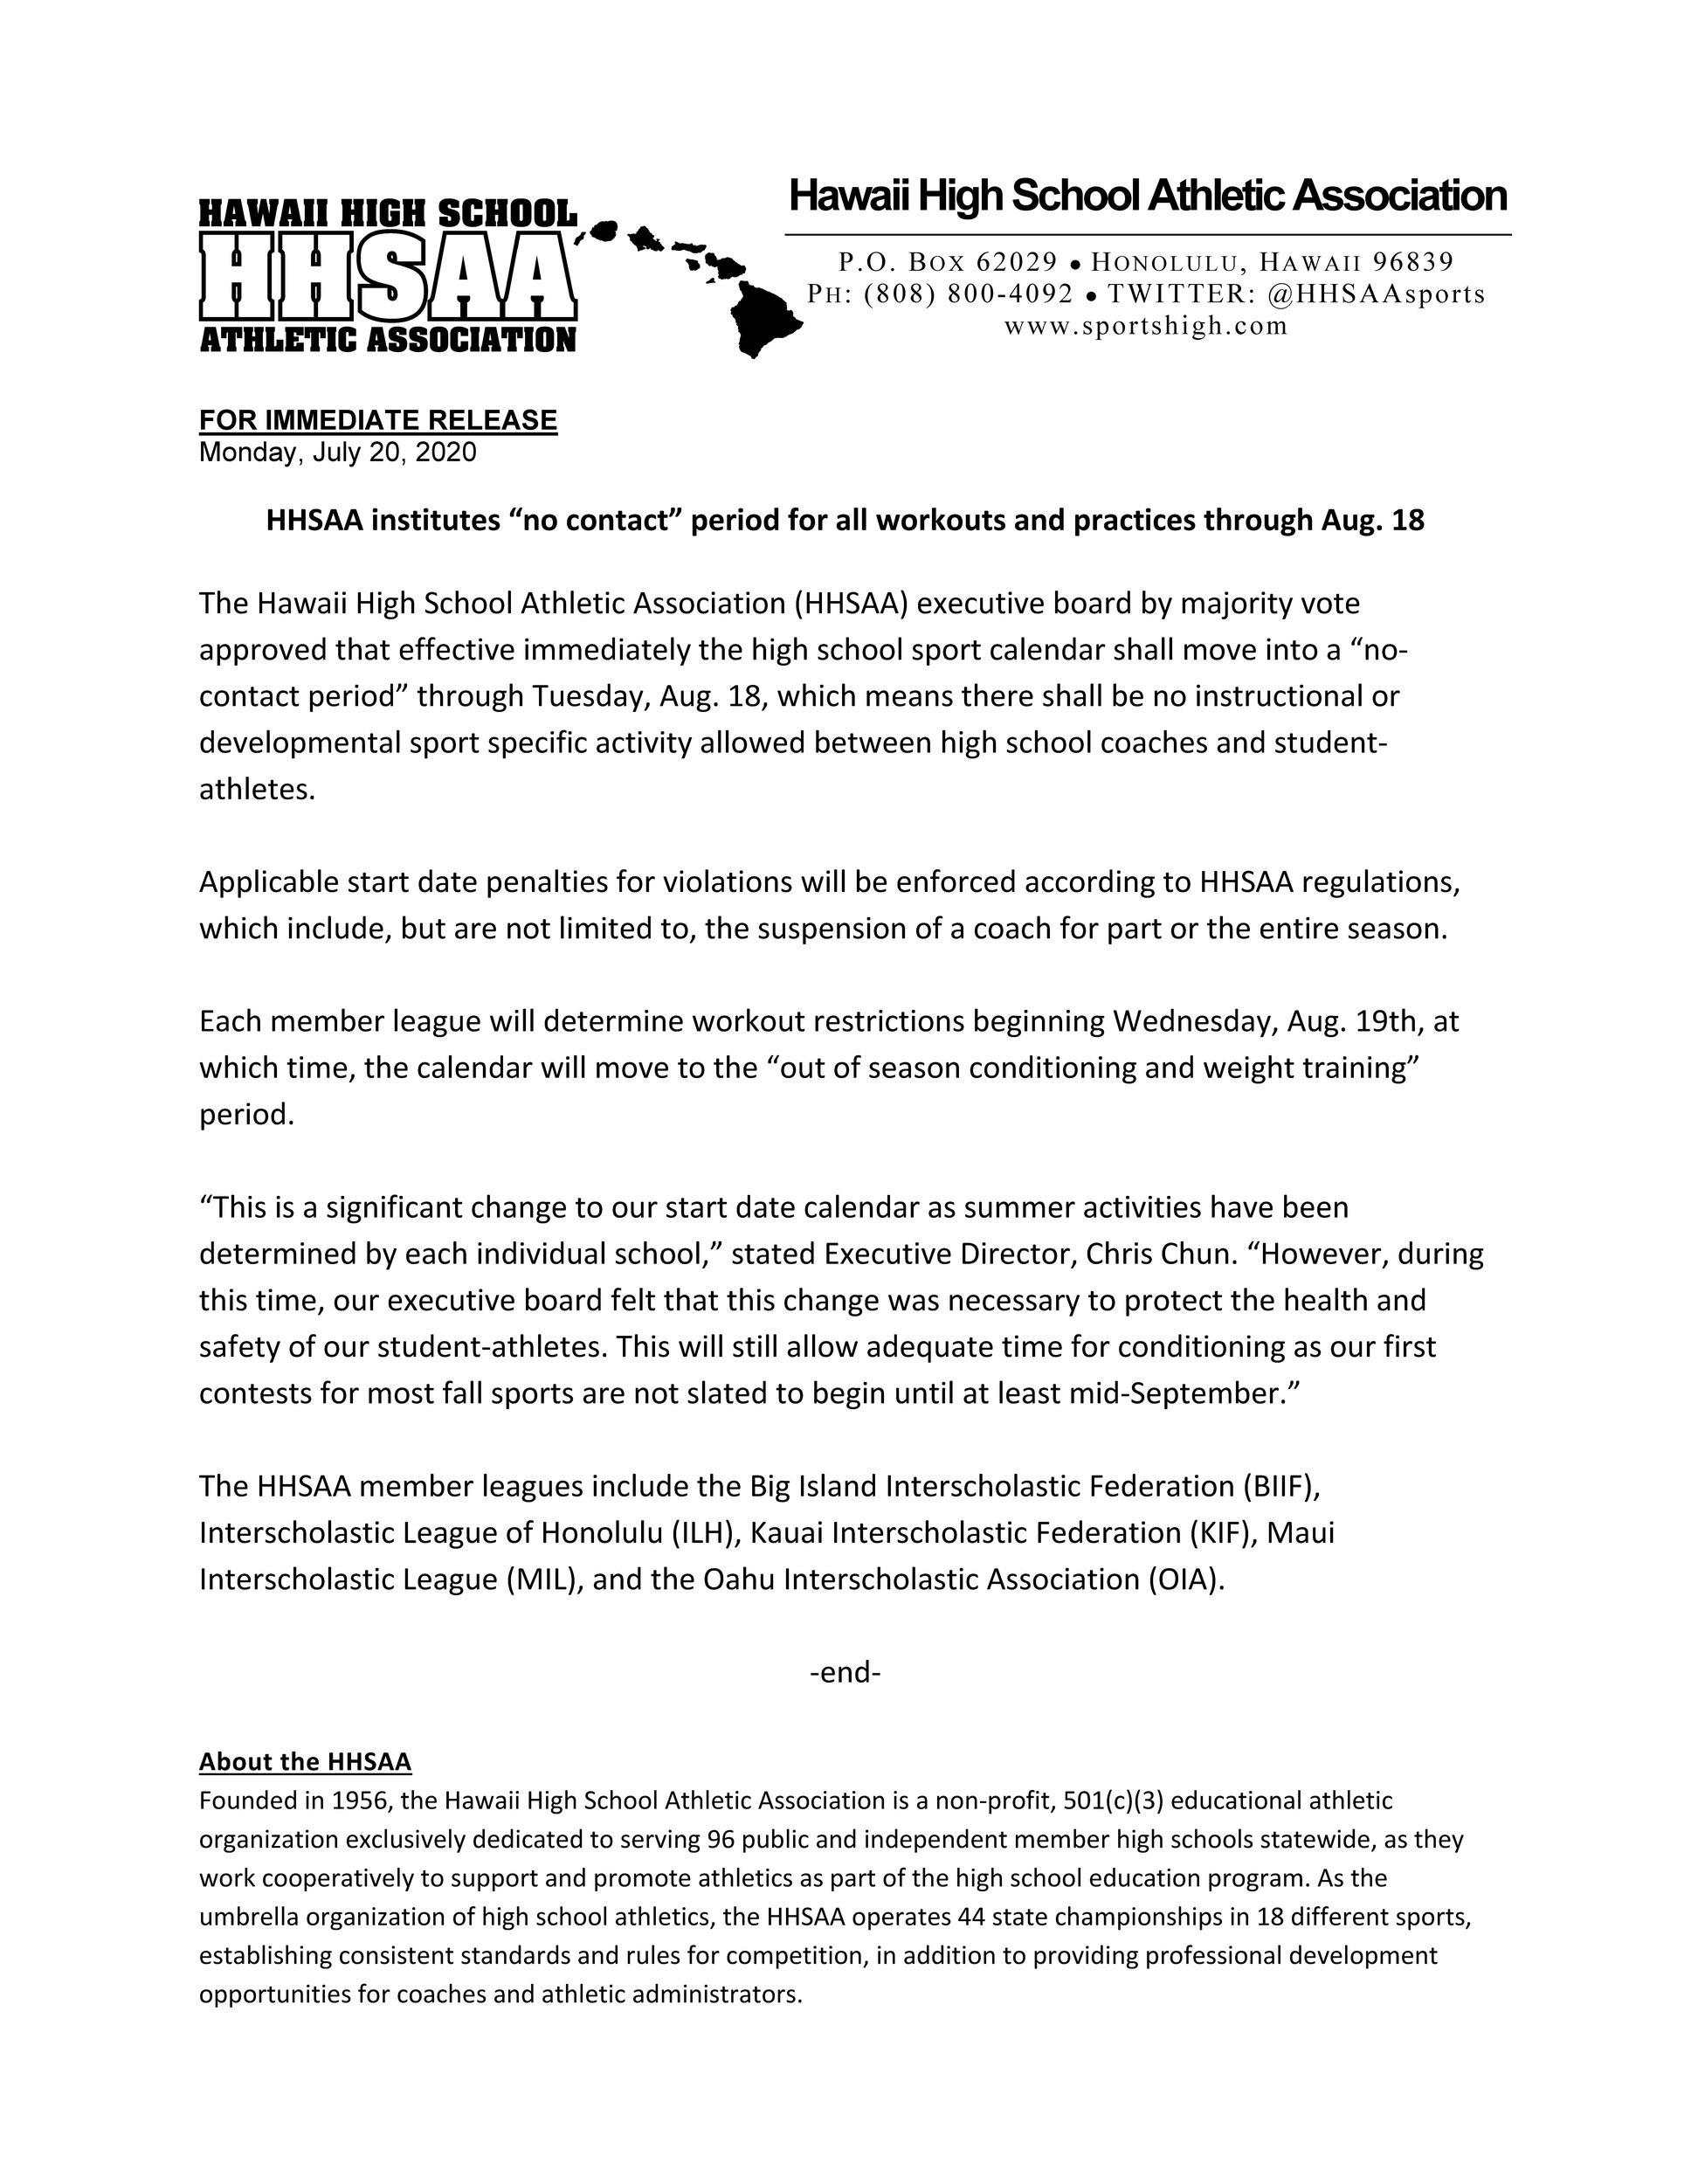 2020-07-20-press-release-hhsaa-institutes-no-contact-dead-period